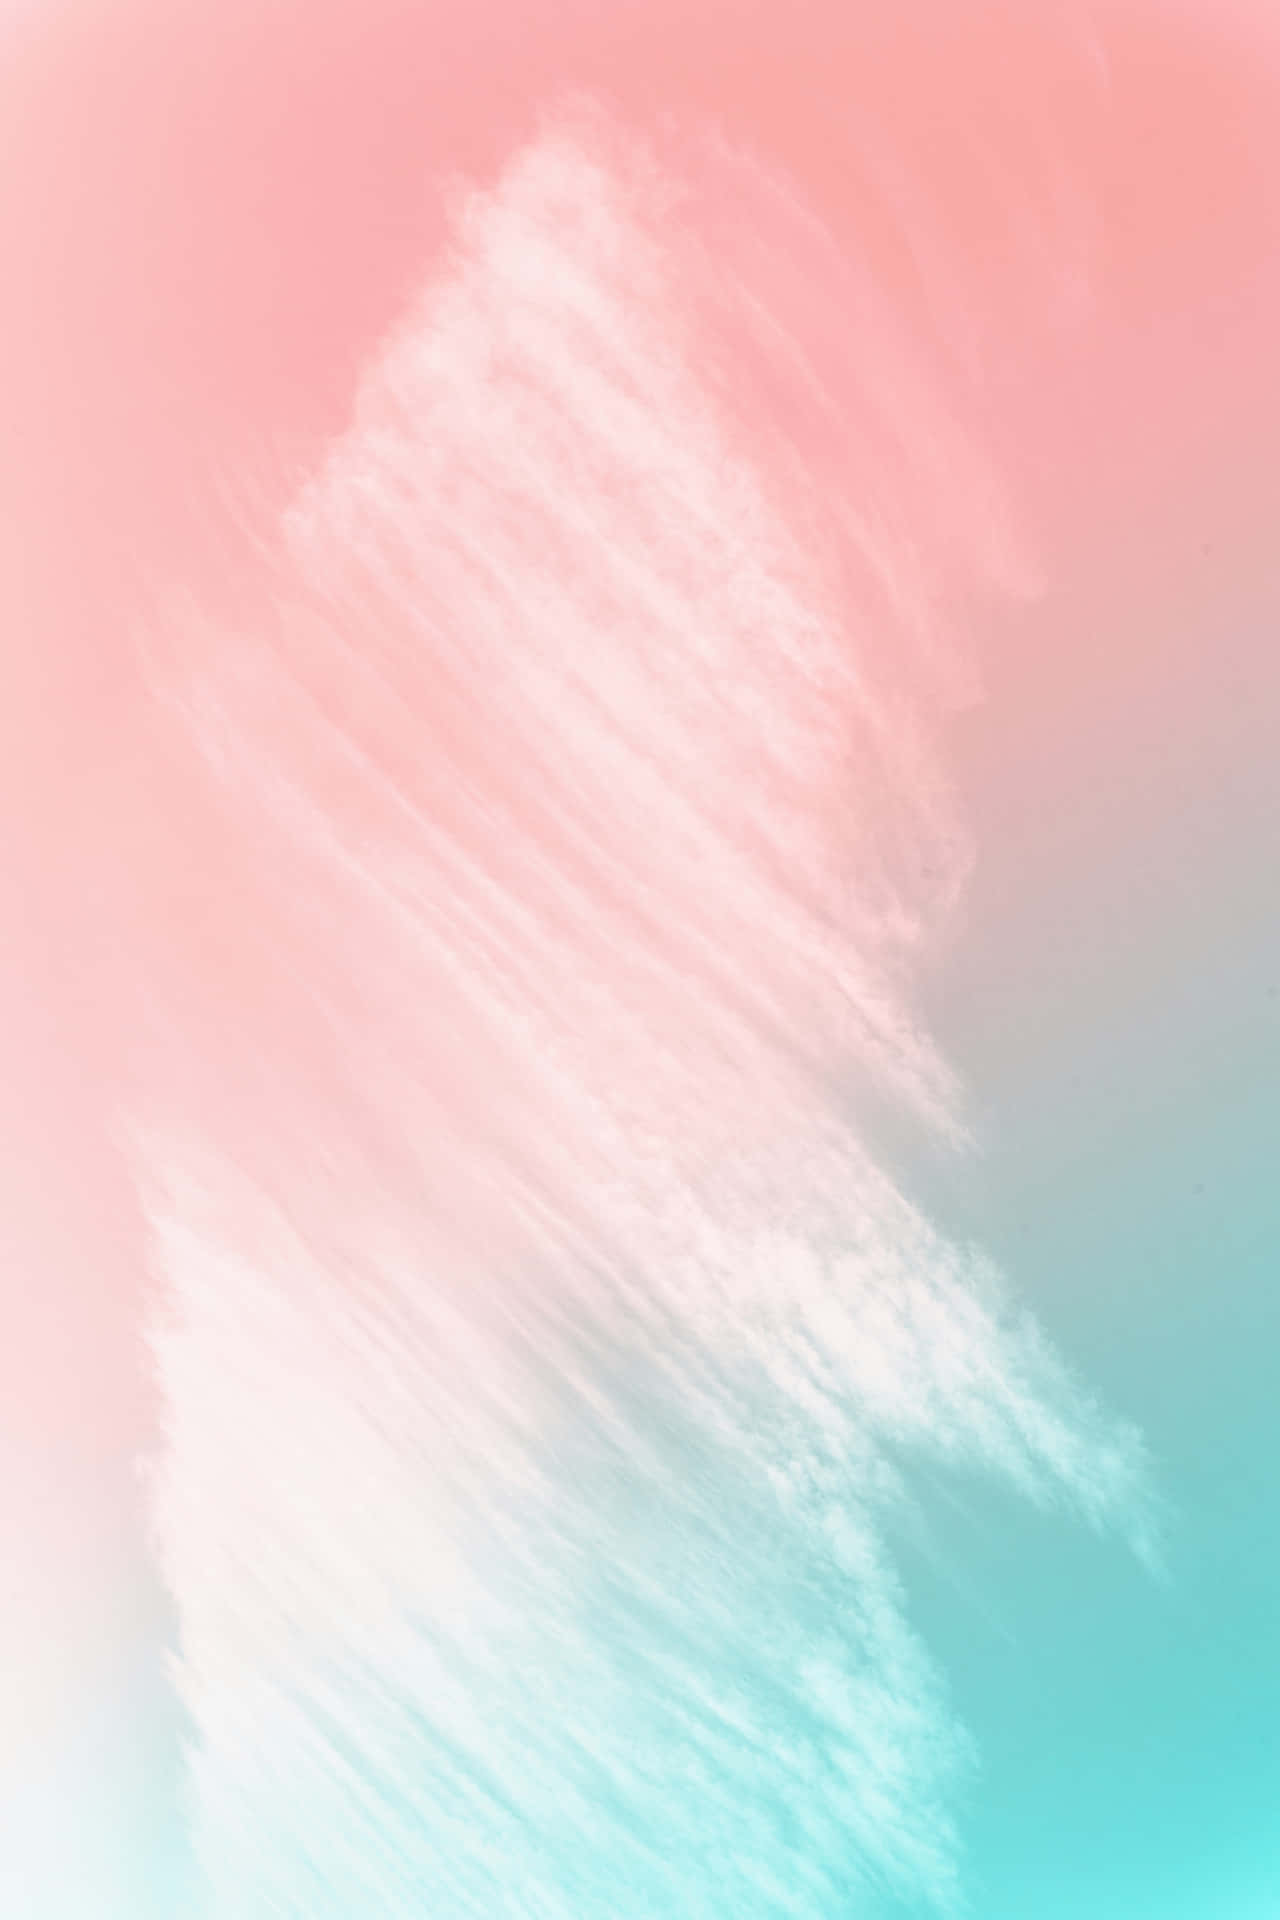 Dreamy pastel sky with vibrant colors